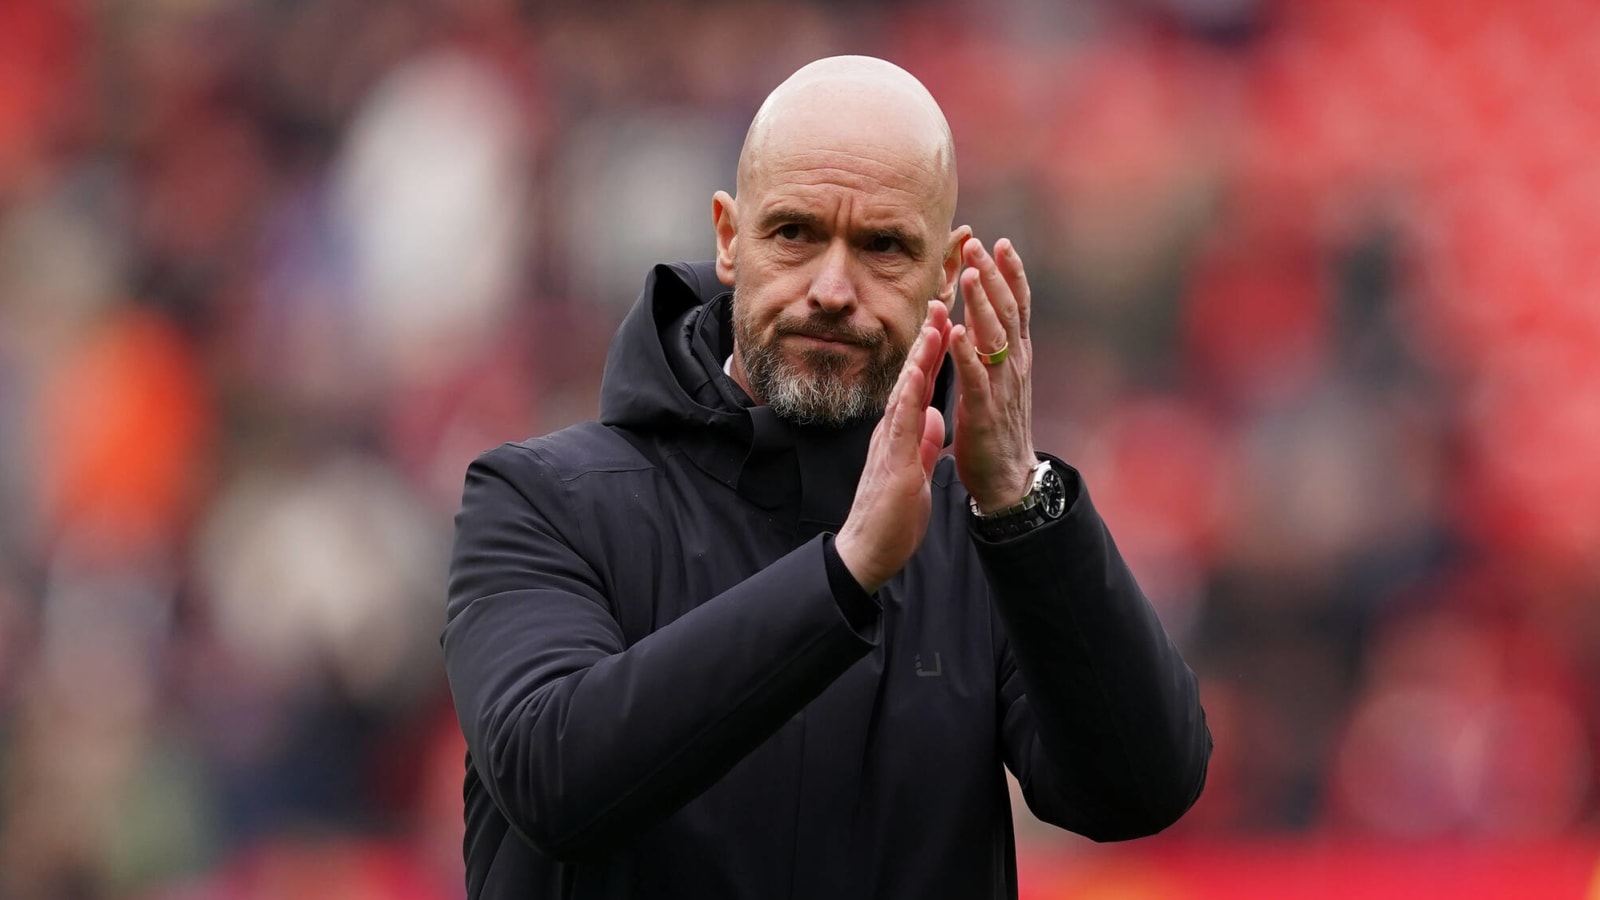 Erik ten Hag hits back at critics lacking knowledge and believes fans back him